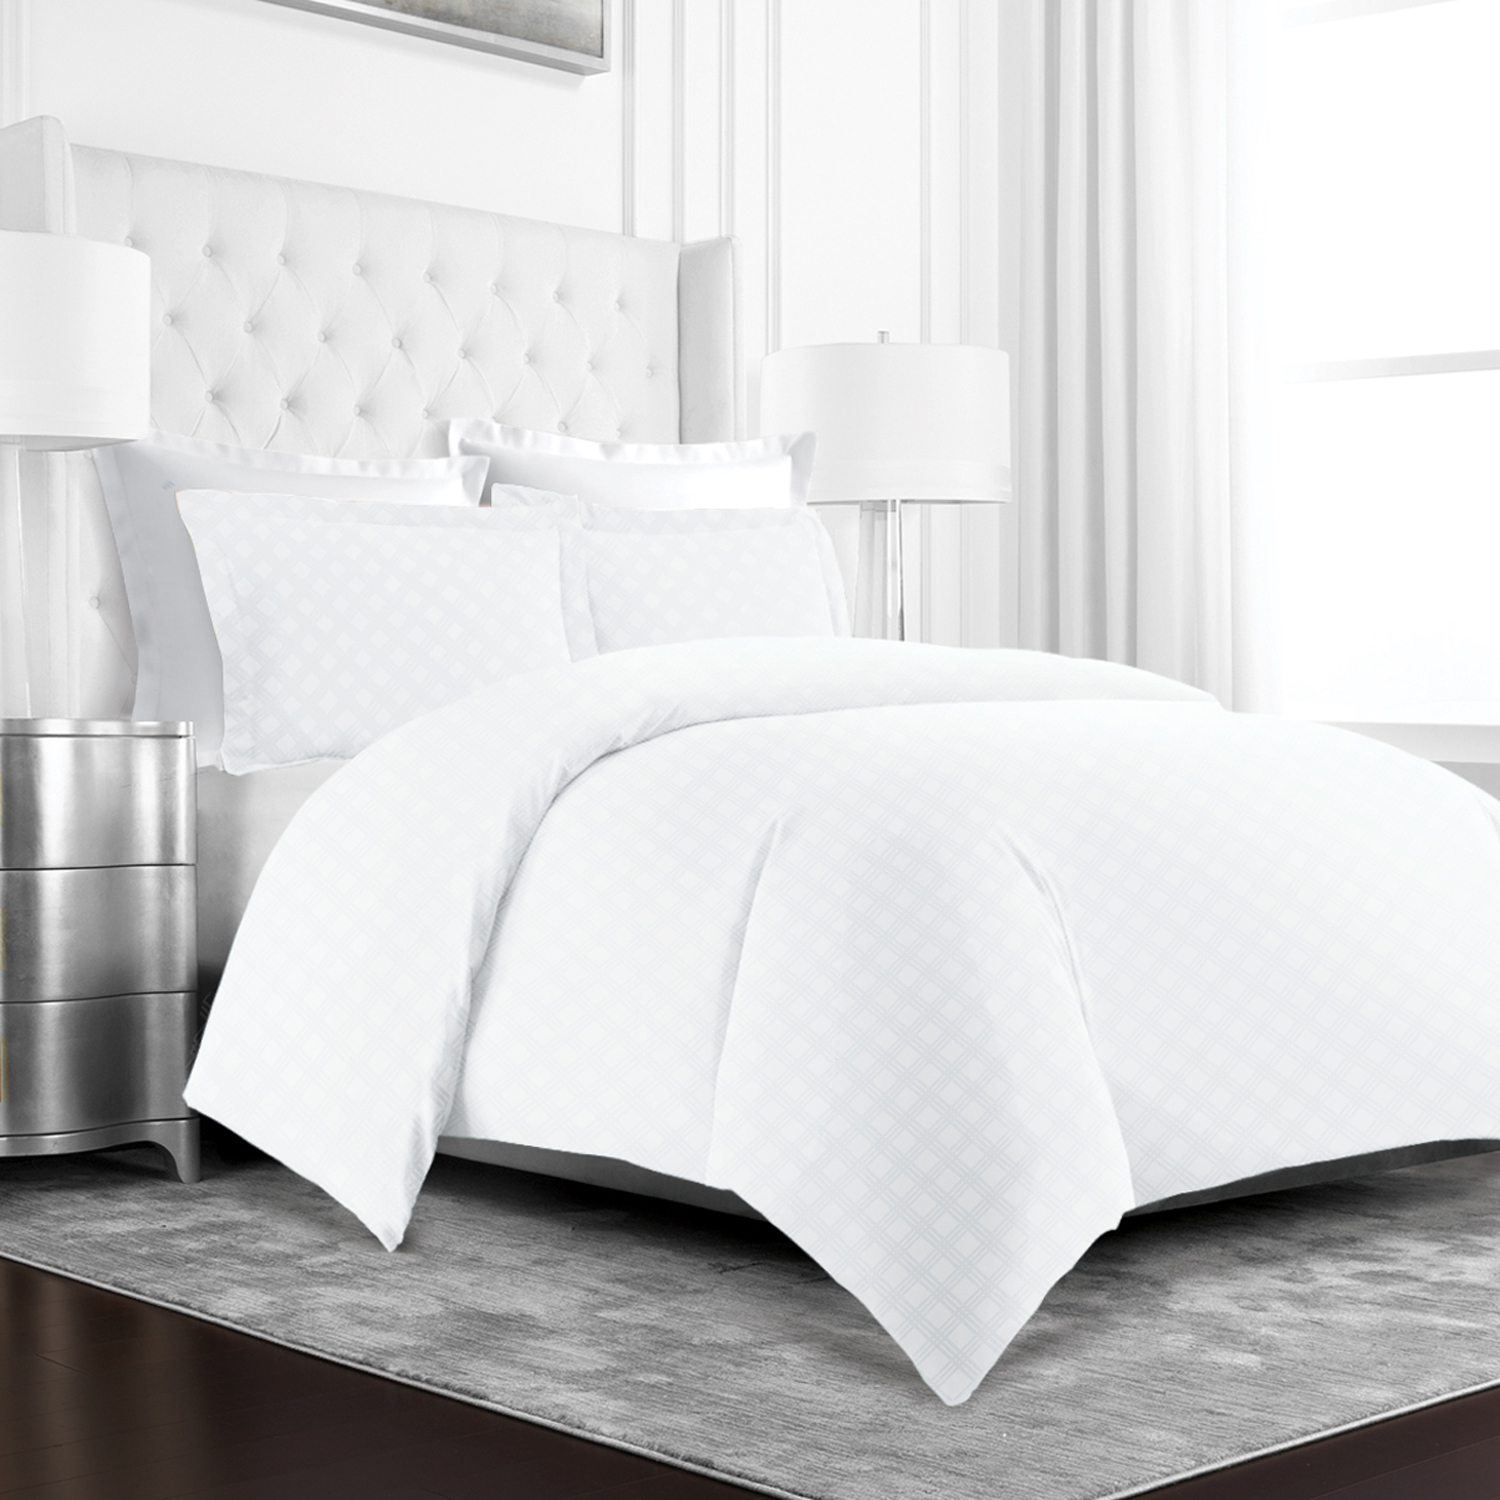 Hotel Collection 3 Piece Duvet Cover Set with Embossed Diamond Pattern by iEnjoy Home